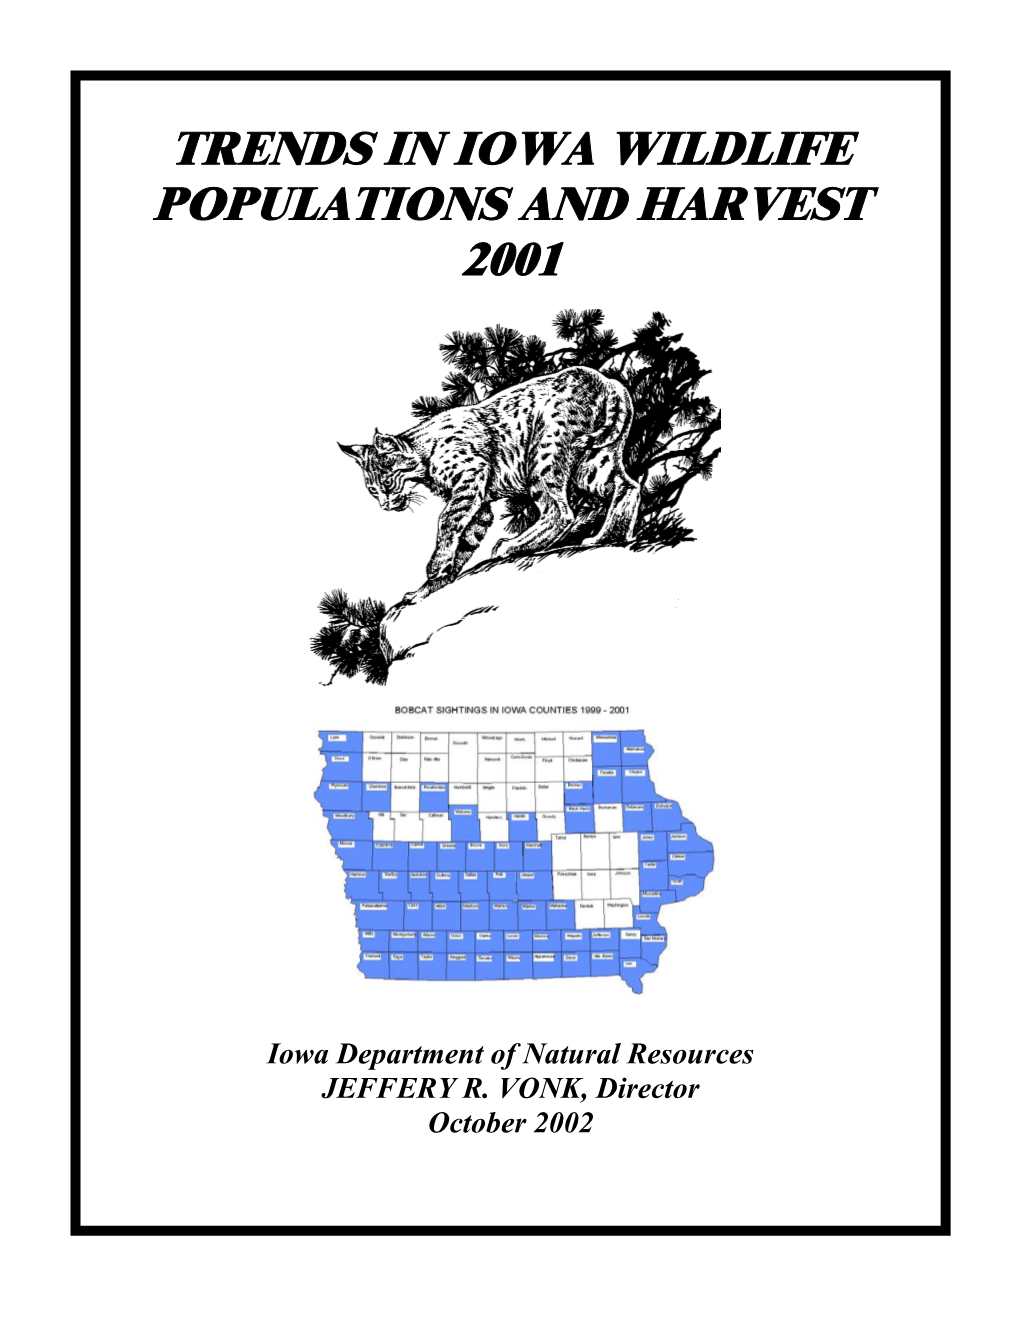 Trends in Iowa Wildlife Populations and Harvest 2001